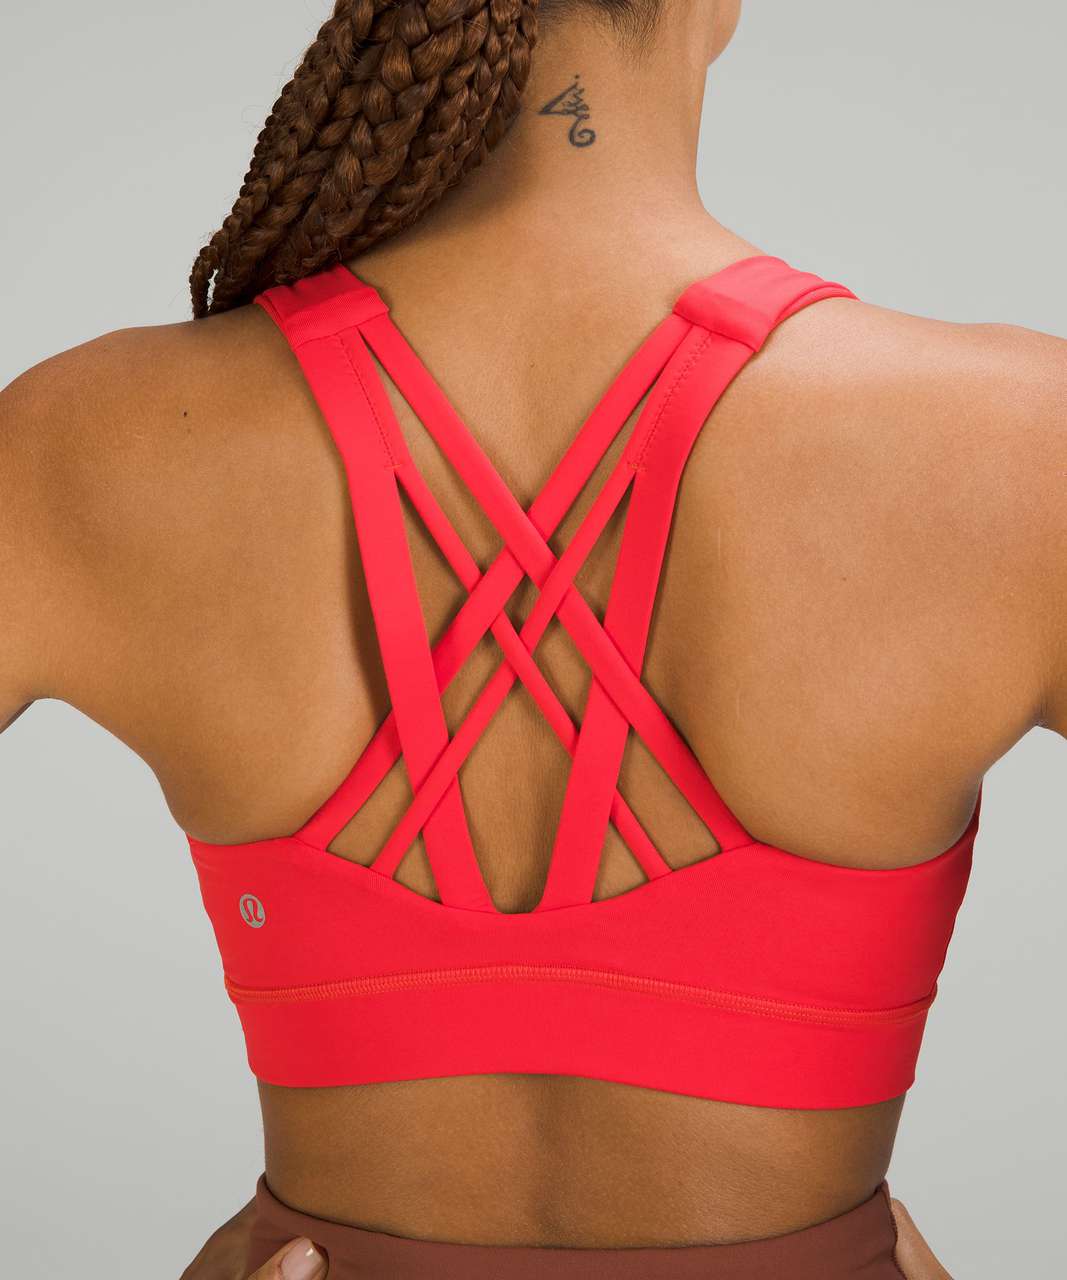 Lululemon Free to Be Elevated Bra *Light Support, DD/DDD(E) Cup - Carnation Red